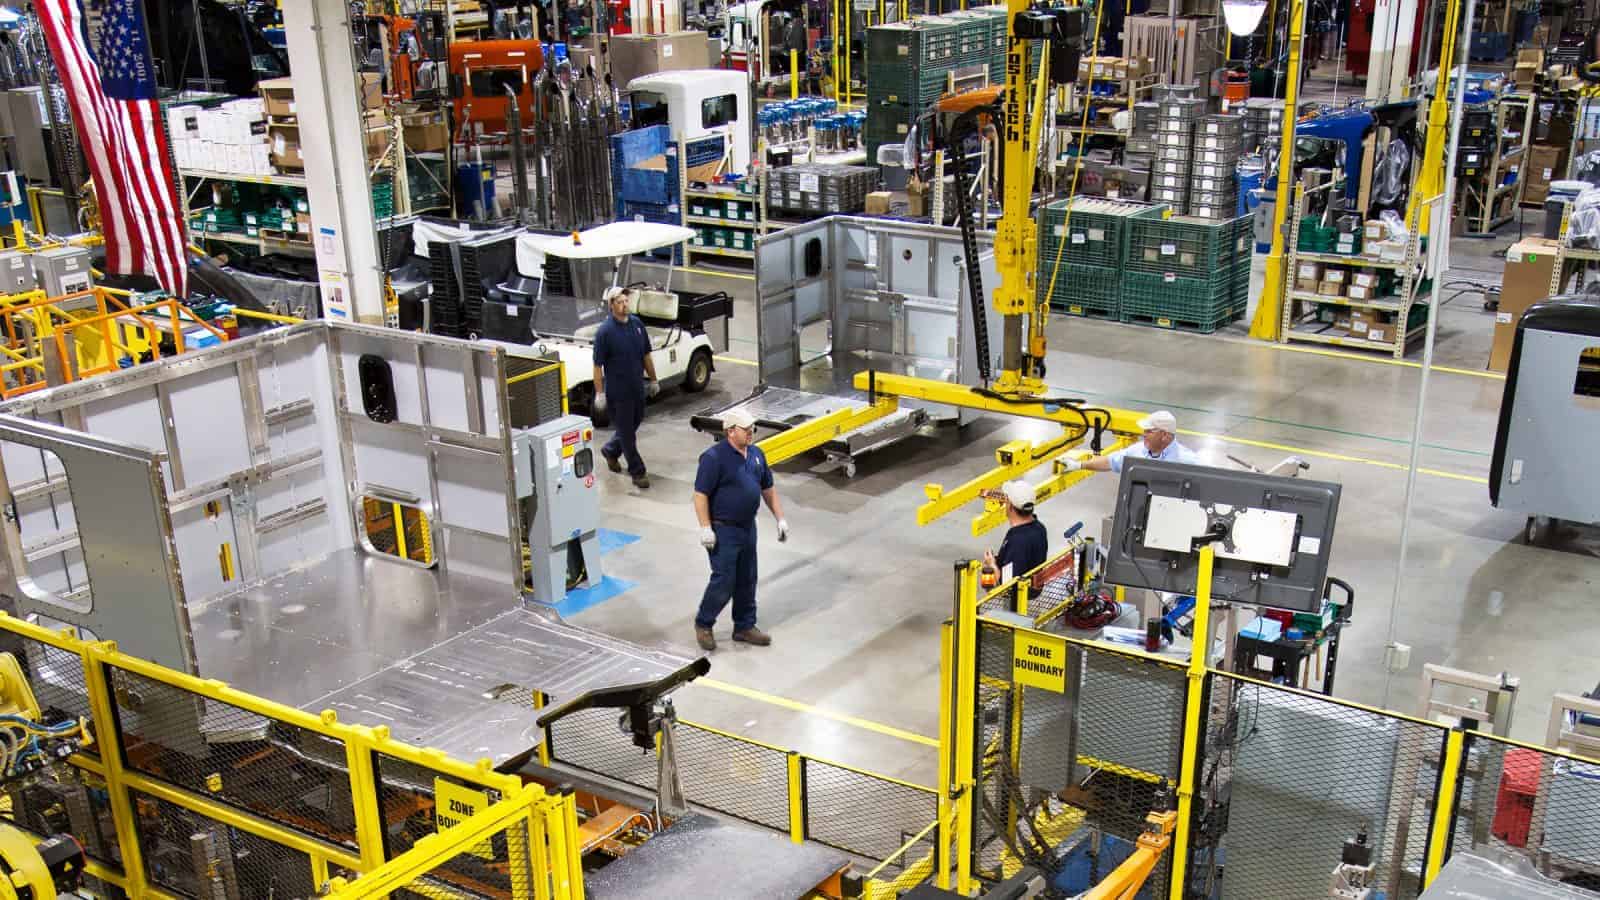 Manufacturing workers walk on the shopfloor.